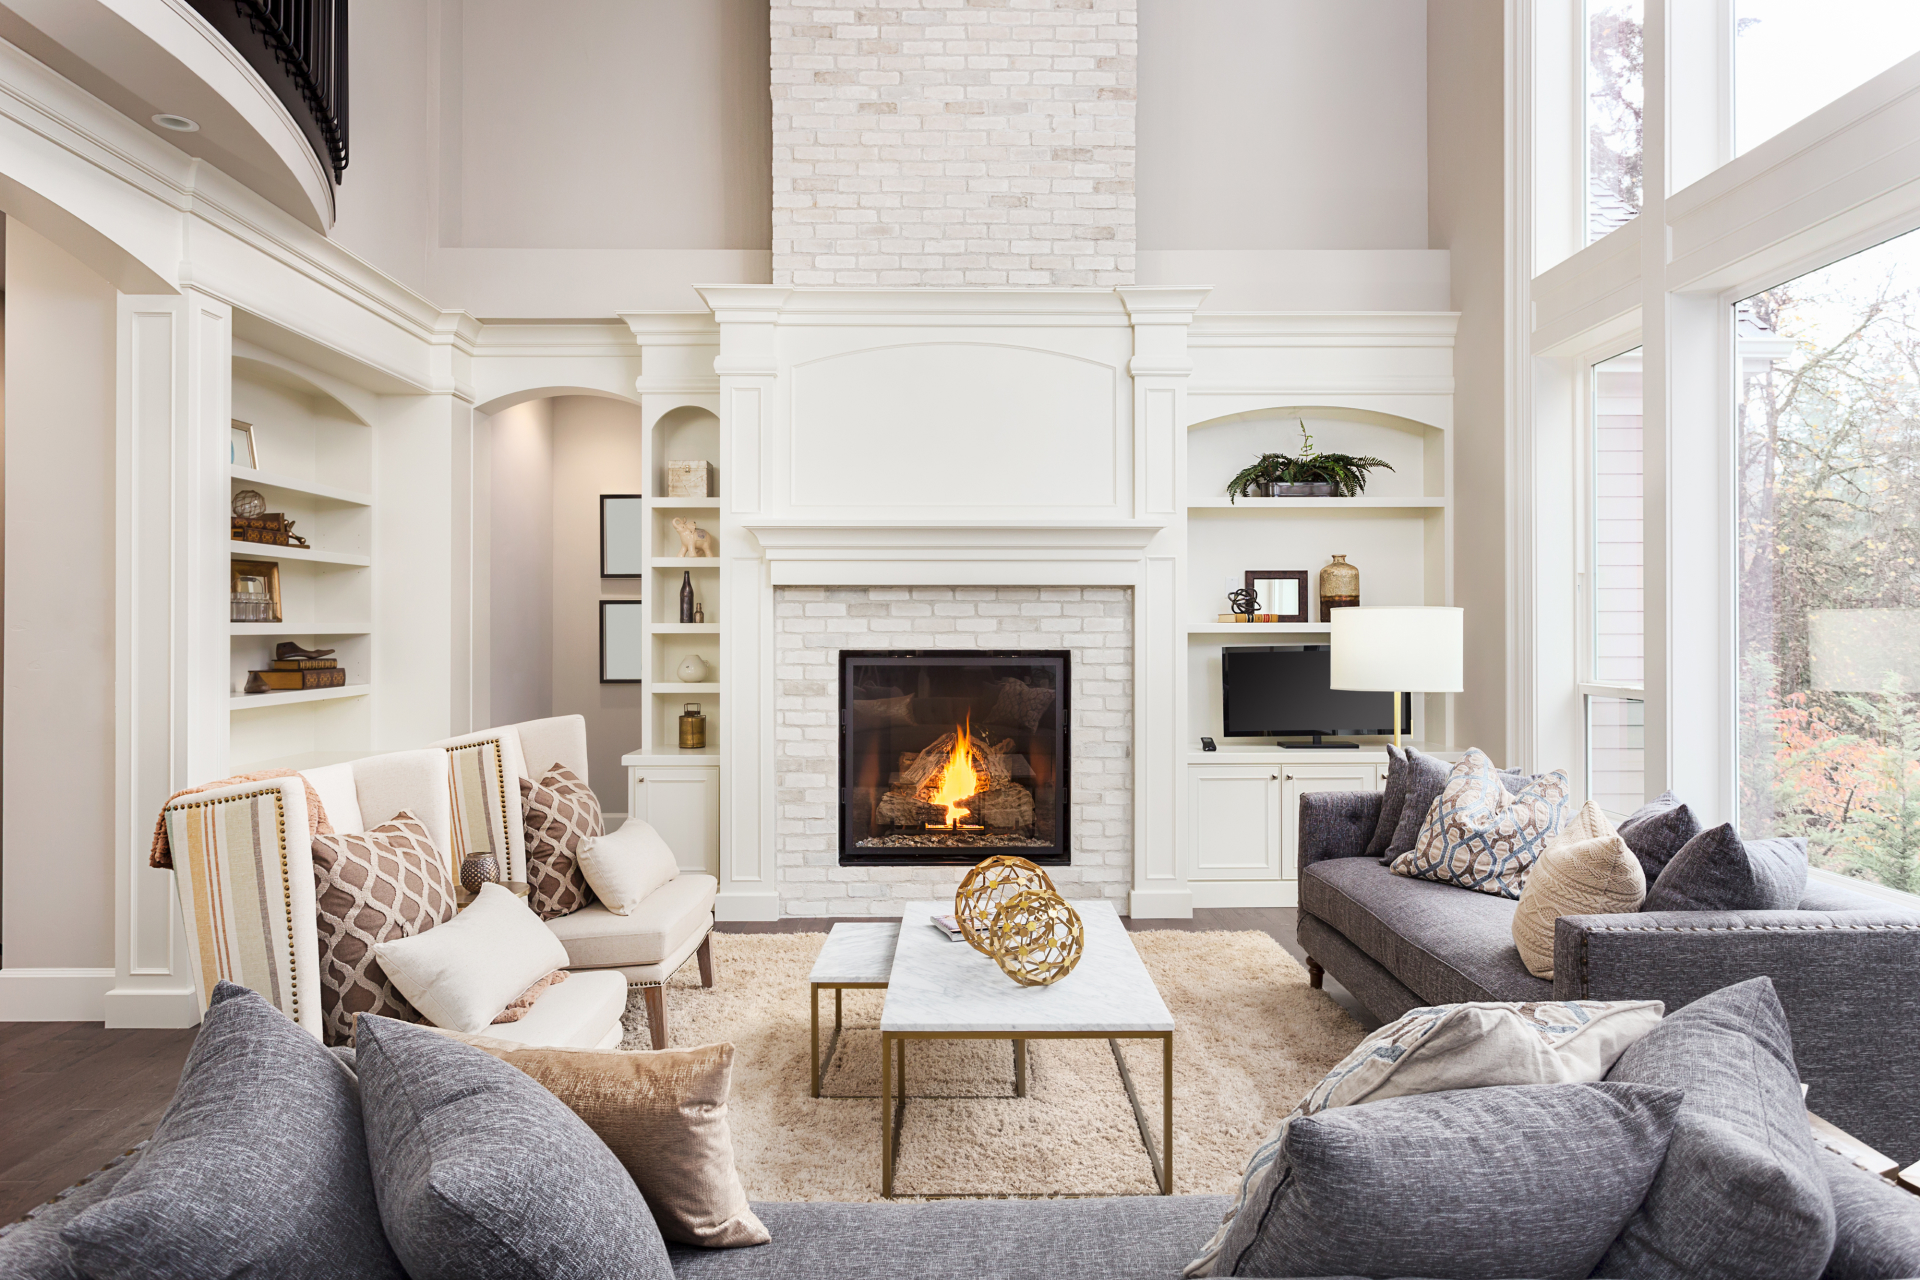 History of Fireplaces - A Look Back Over the Years